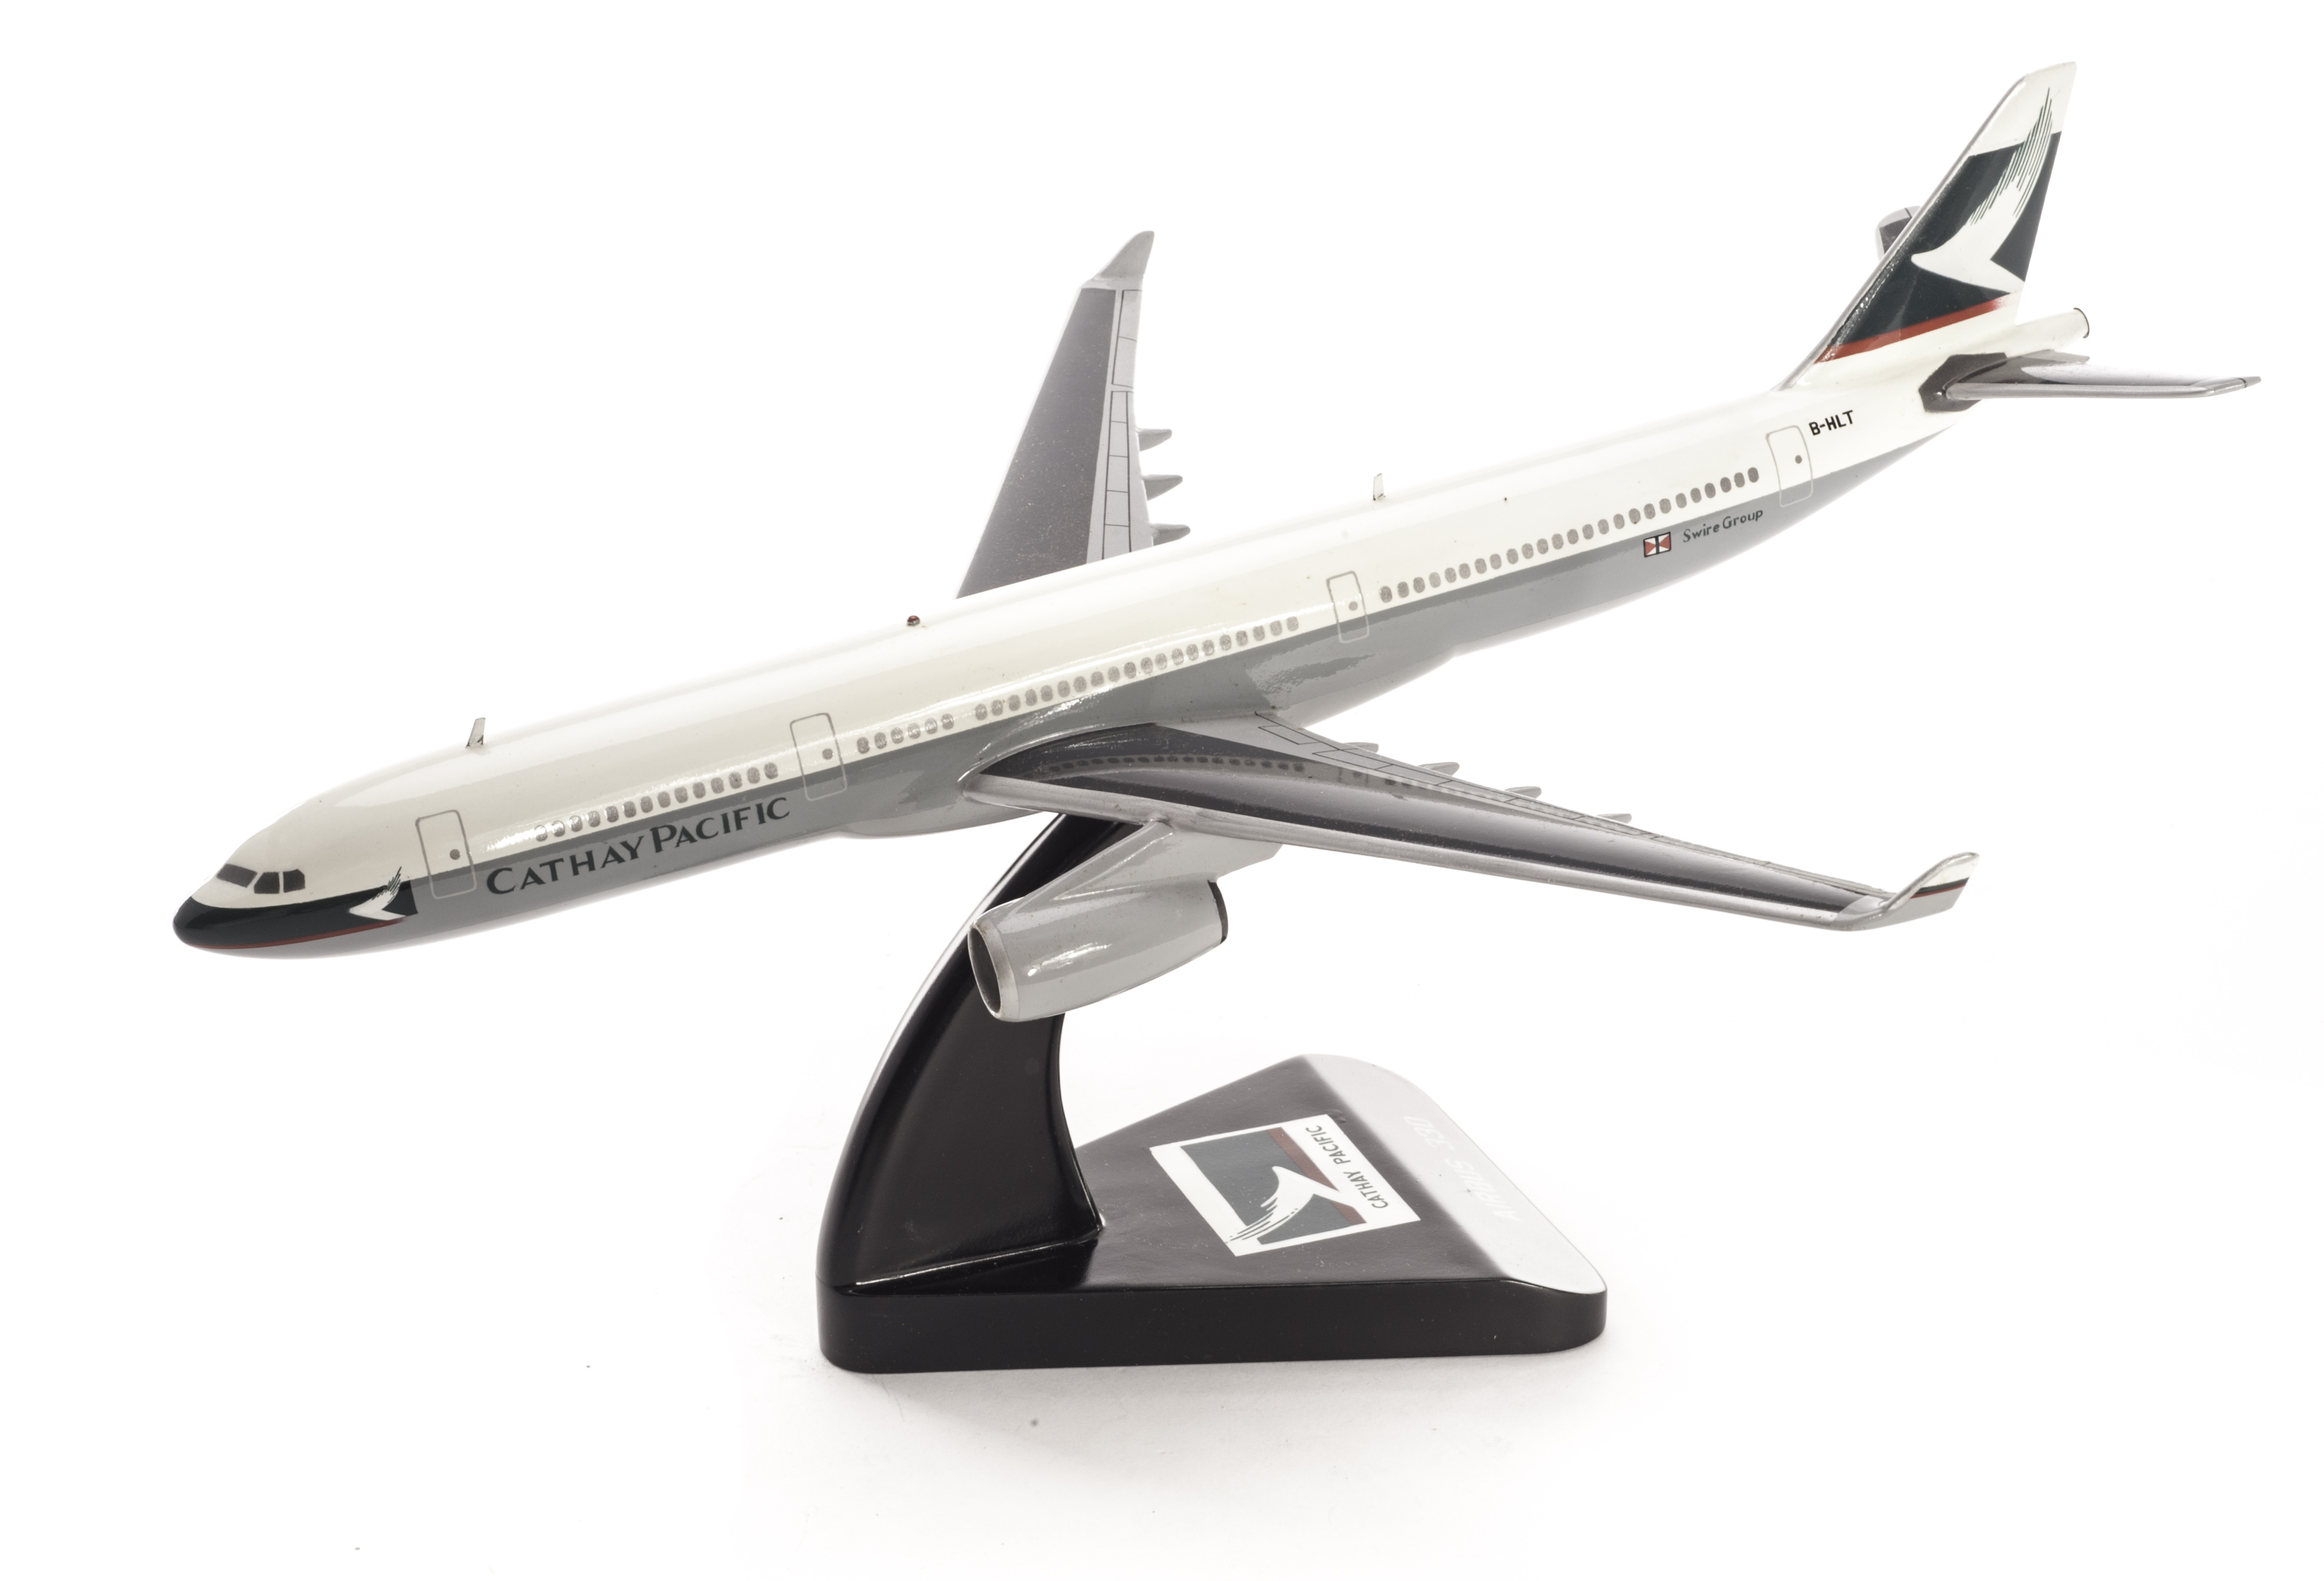 A Bravo Delta Models Airbus 330, scale model wooden aircraft, hand-finished in Cathay Pacific